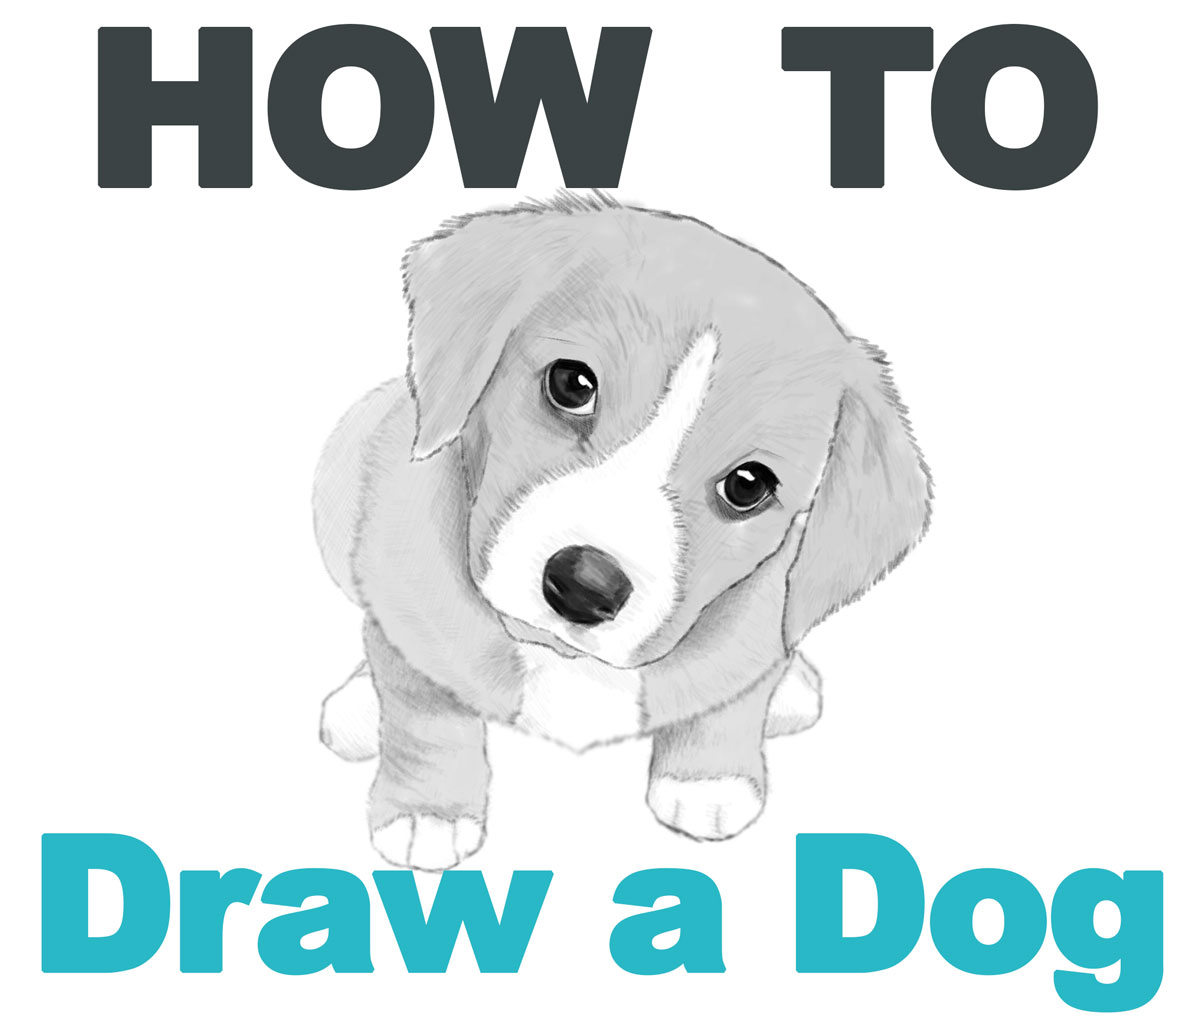 How to Draw a Dog or Puppy Realistic - Easy Step by Step Drawing Tutorial -  How to Draw Step by Step Drawing Tutorials